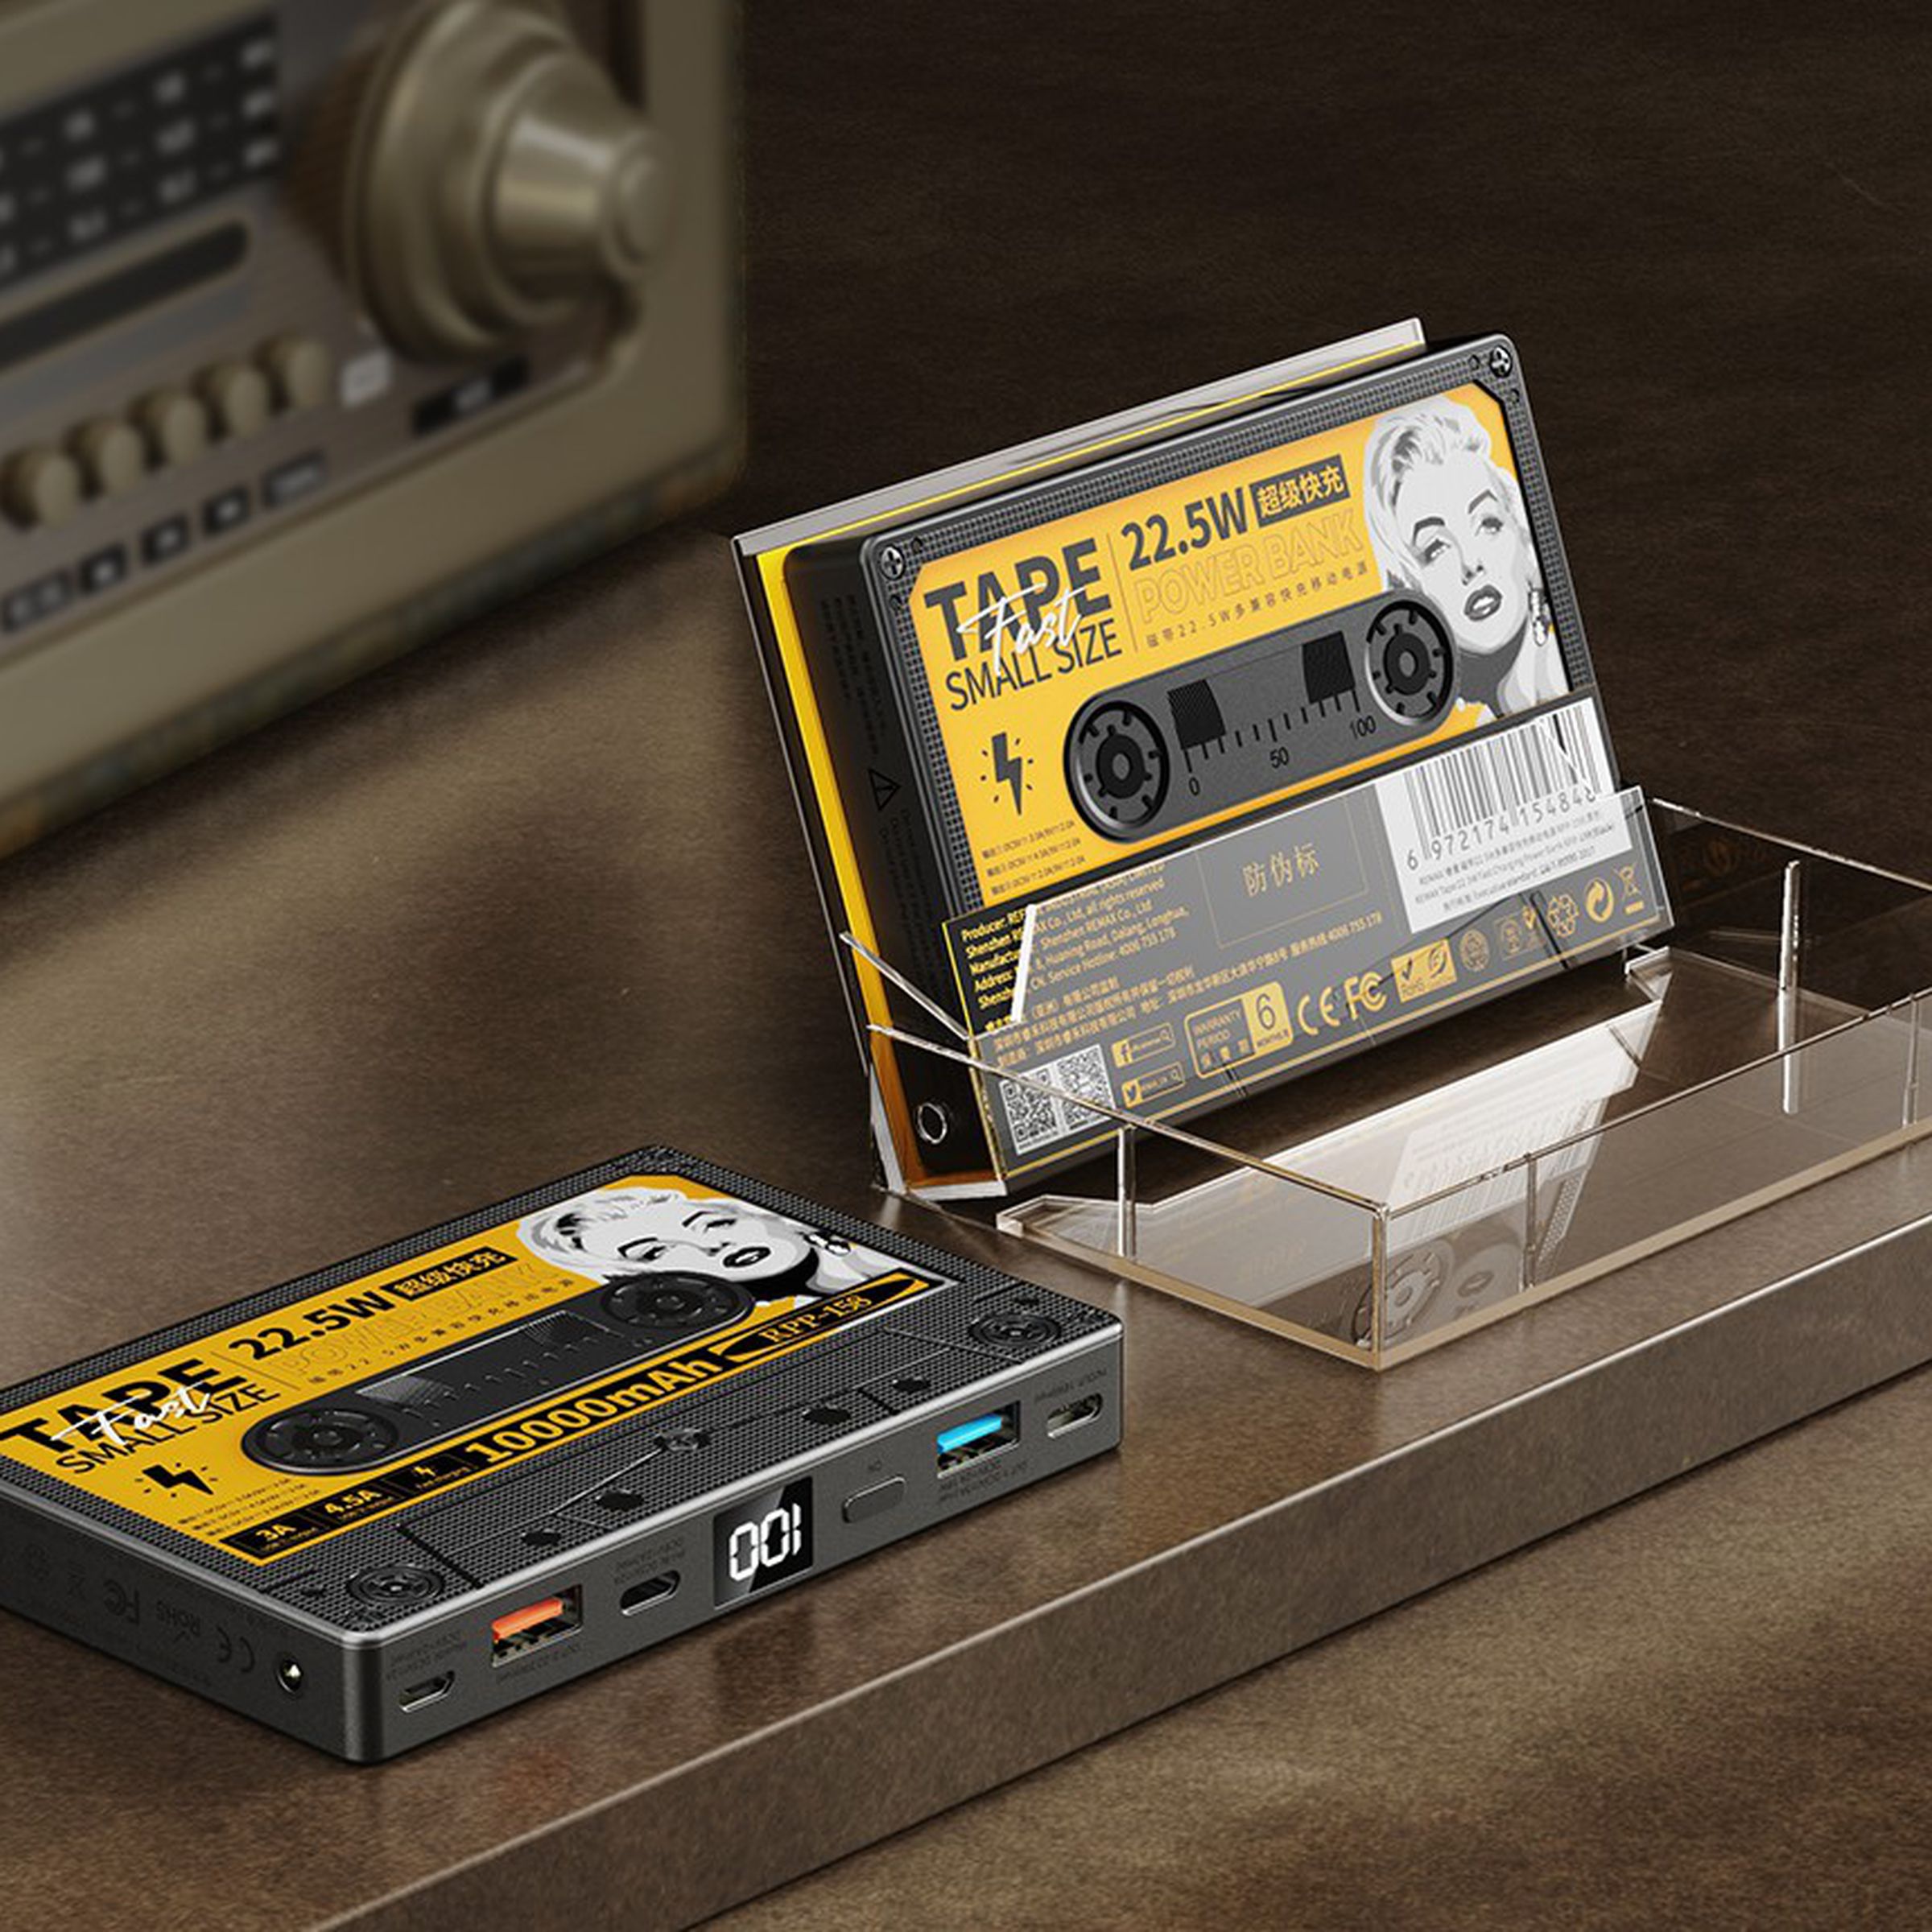 it looks like a cassette tape, but it’s got USB ports and a little display.